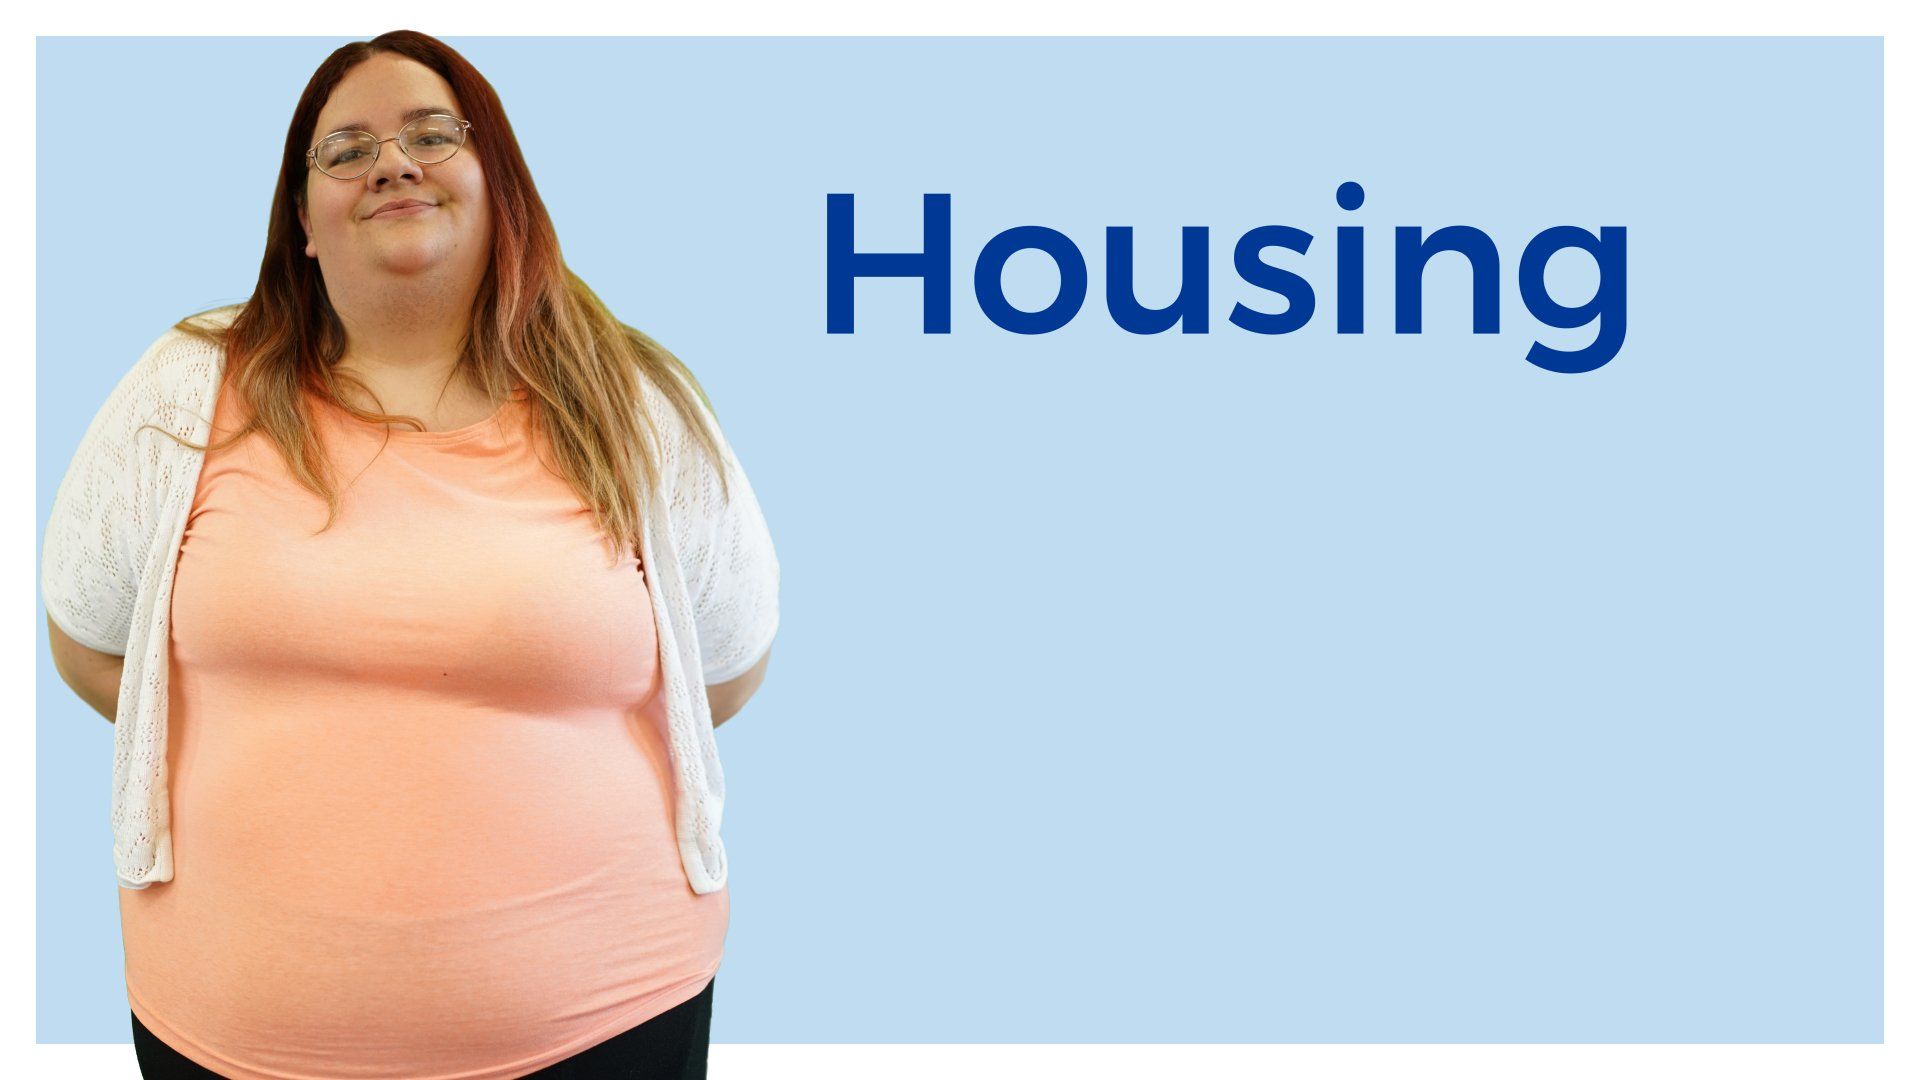 Word saying Housing and a person next to the word, smiling